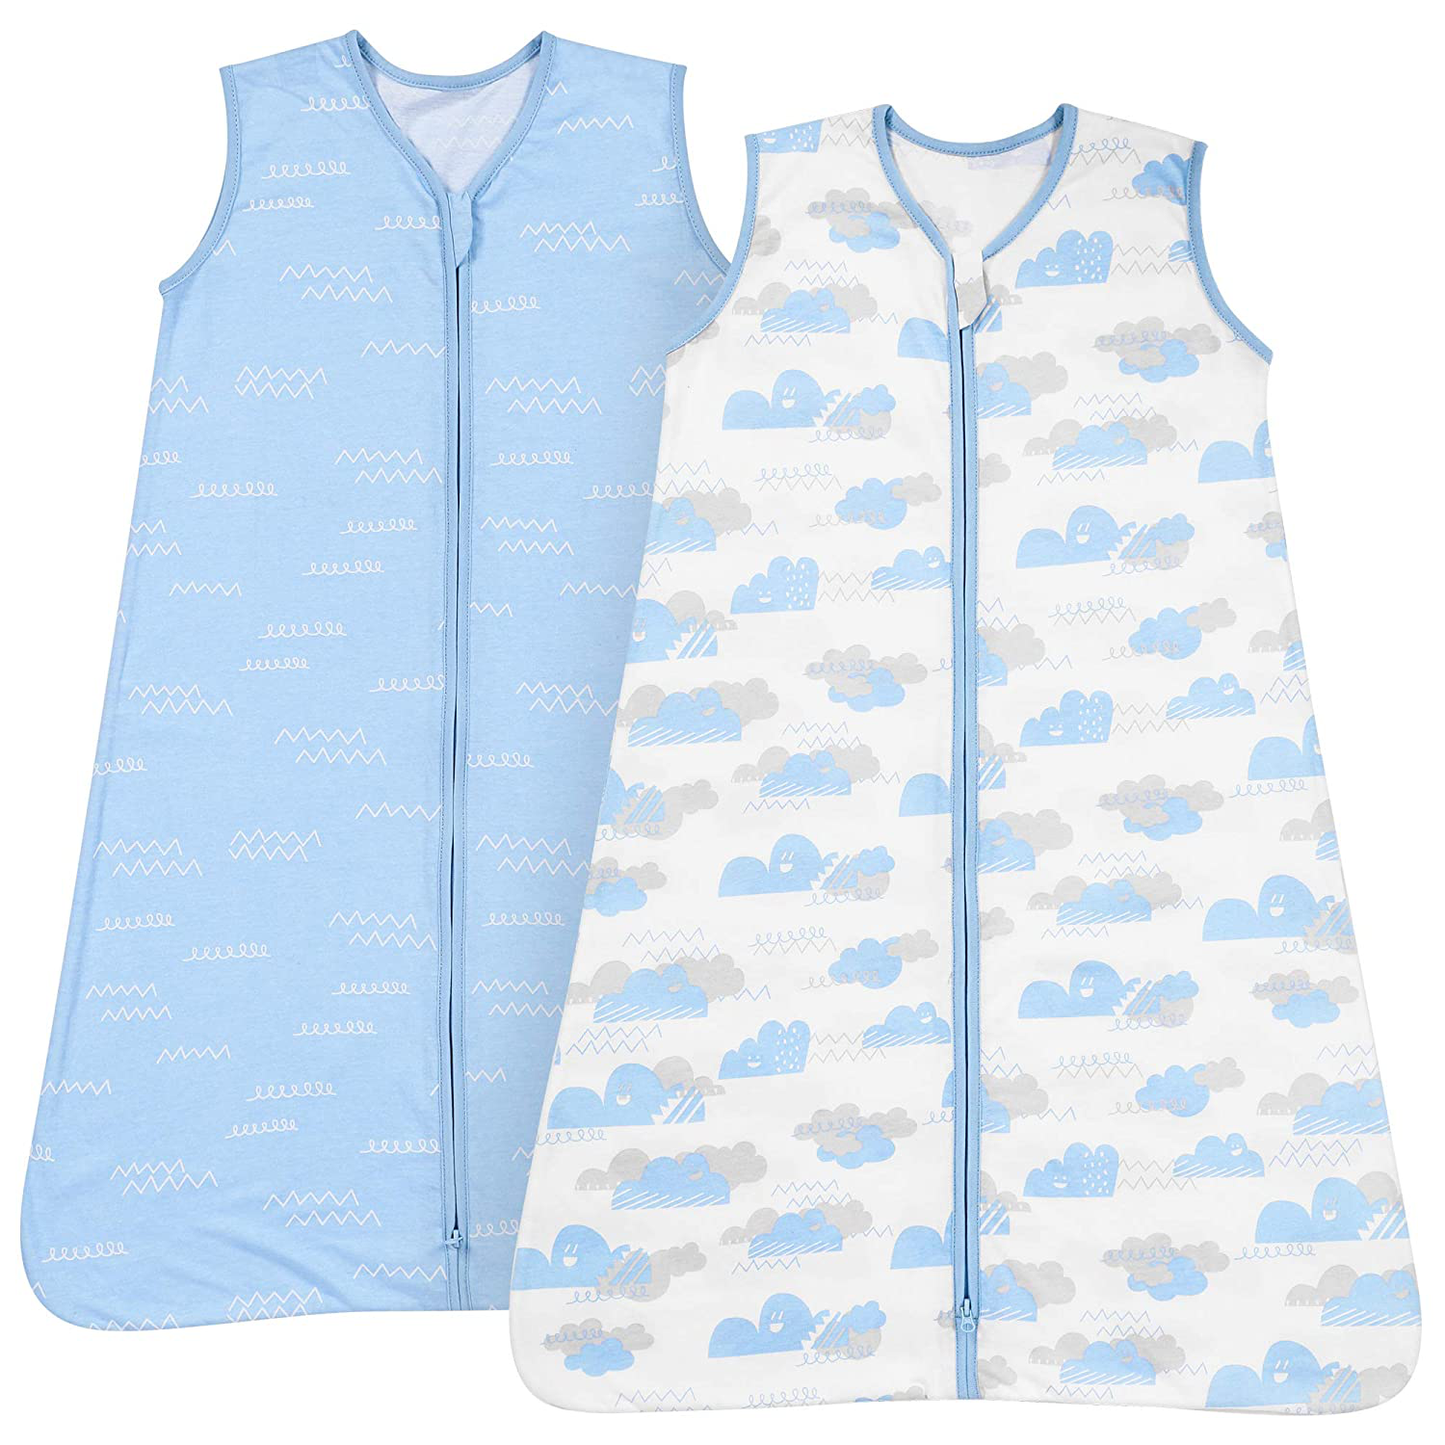 2 Pack TILLYOU Breathable Cotton Baby Wearable Blanket with 2-Way Zipper, Super Soft Lightweight 2-Pack Sleeveless Sleep Bag Sack